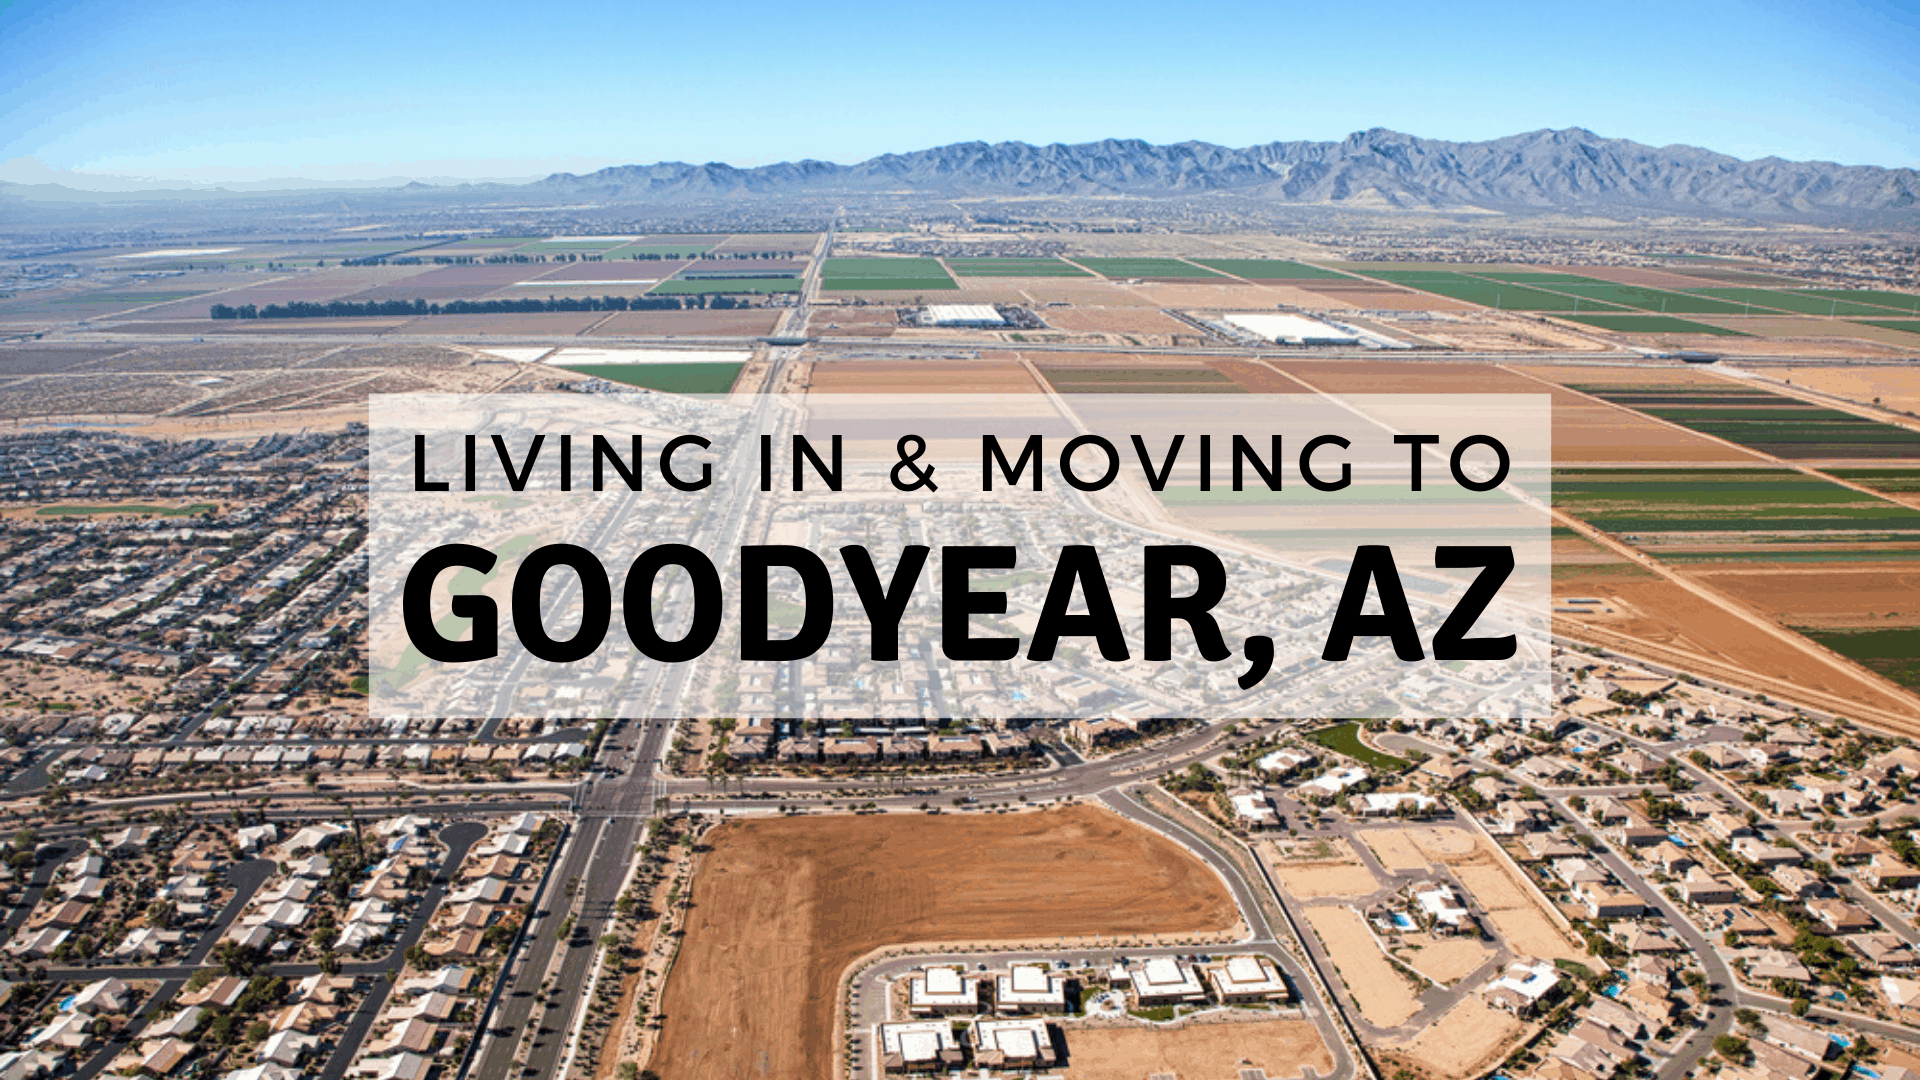 Living in & Moving to Goodyear, AZ